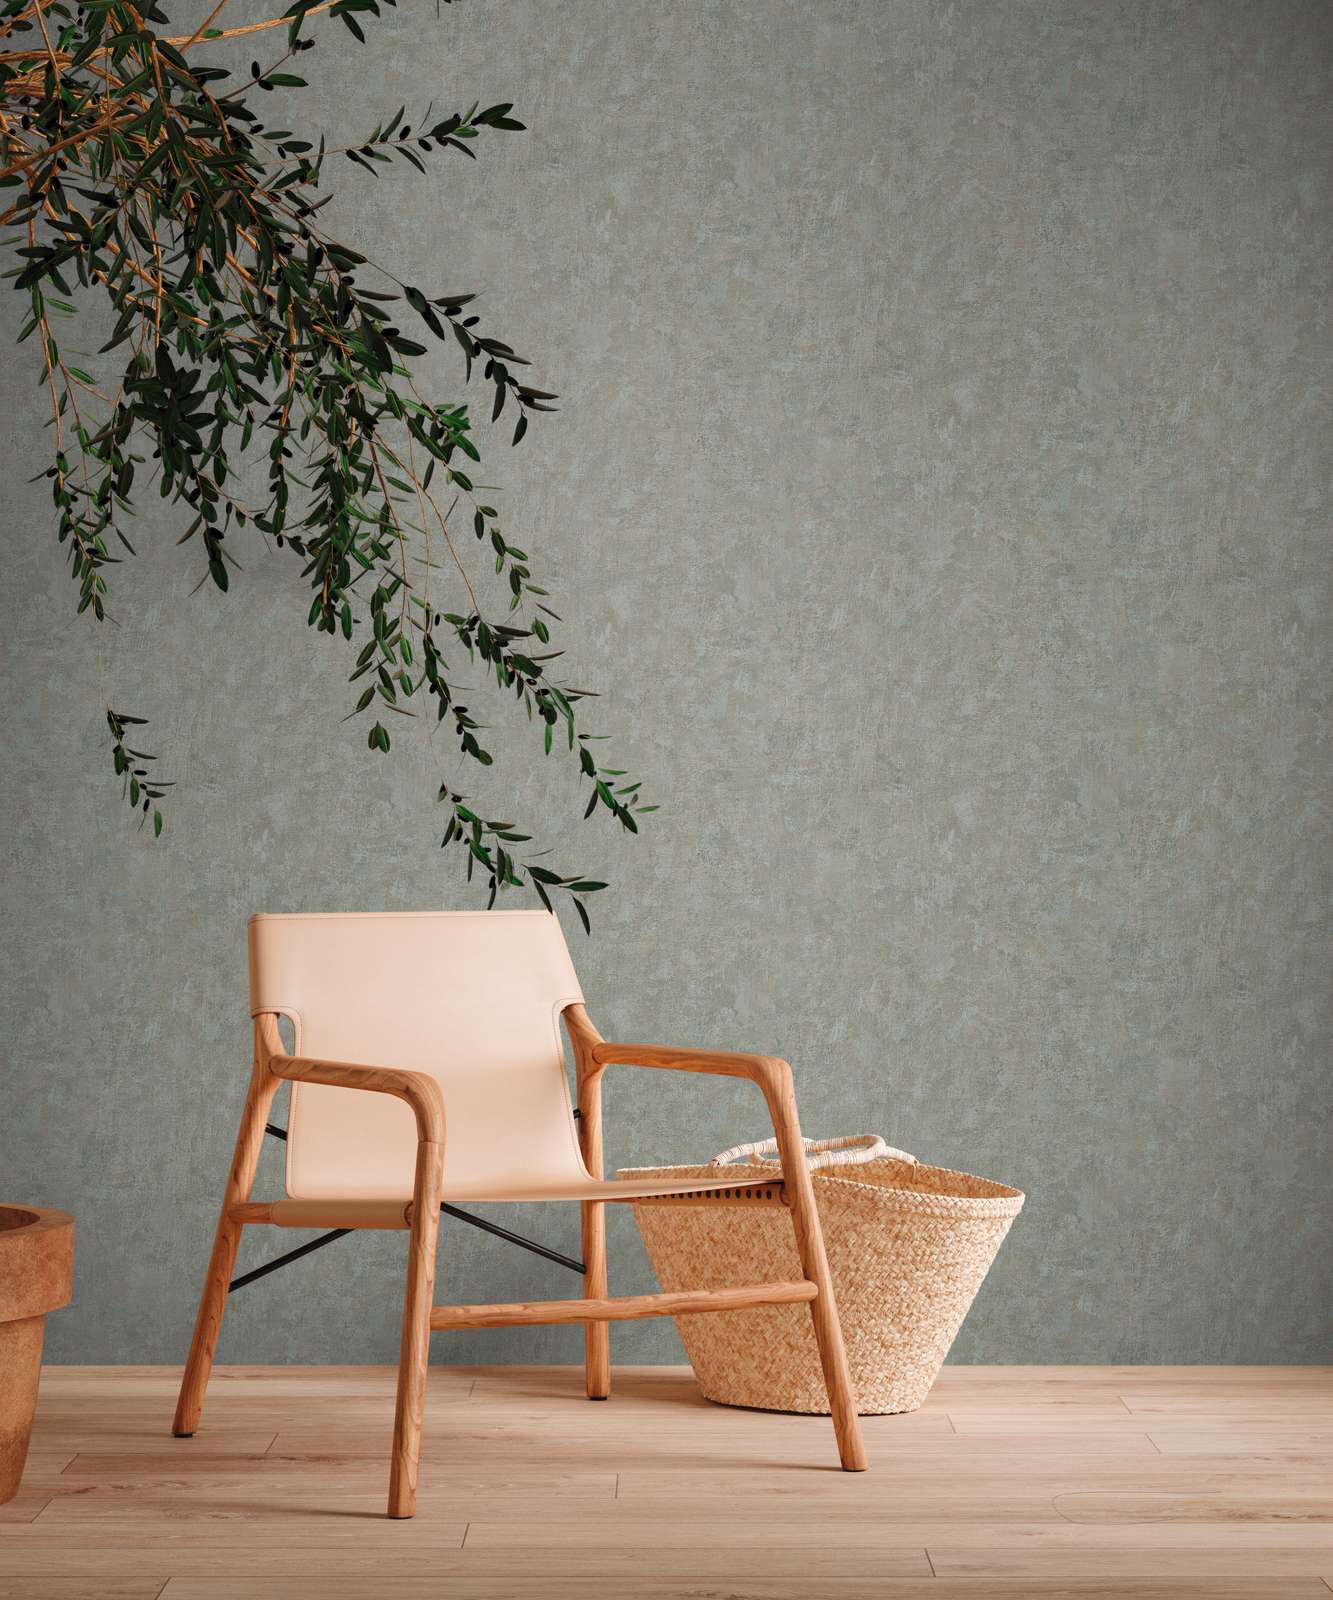             PVC-free non-woven wallpaper with textured look - green, blue
        